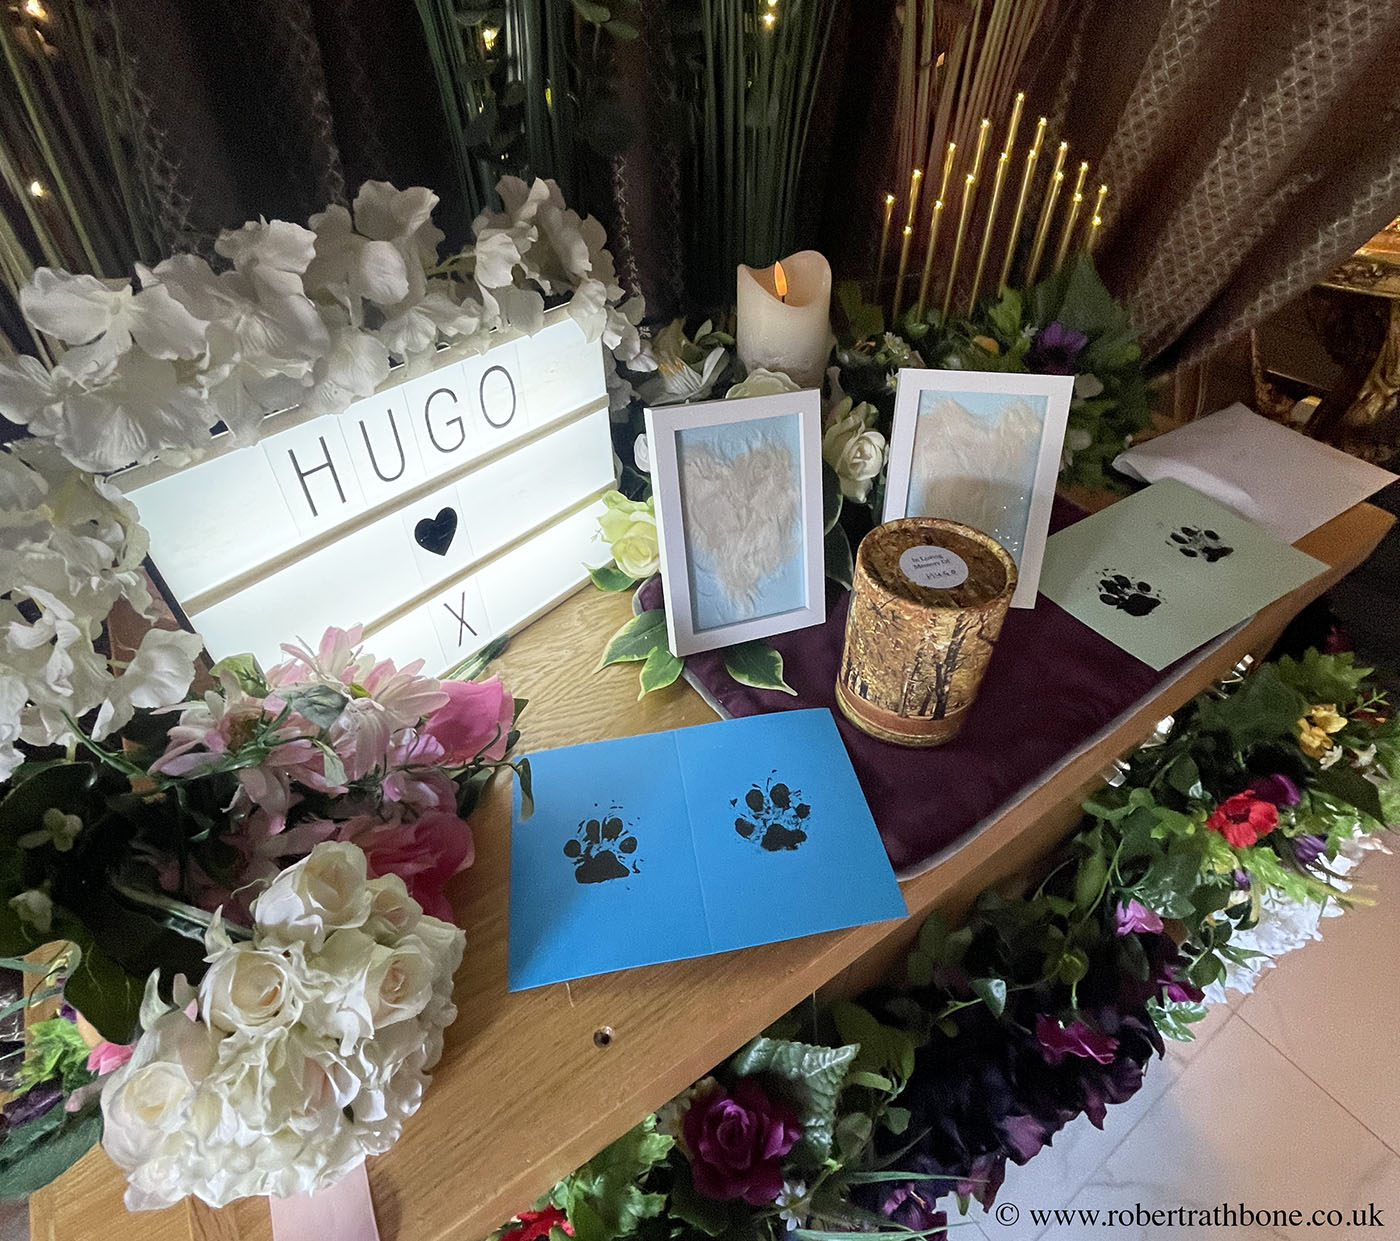 Debs Hayball's 14 year old terrier Hugo at Nottingham Pet Crematorium after it was killed in an unprovoked attack